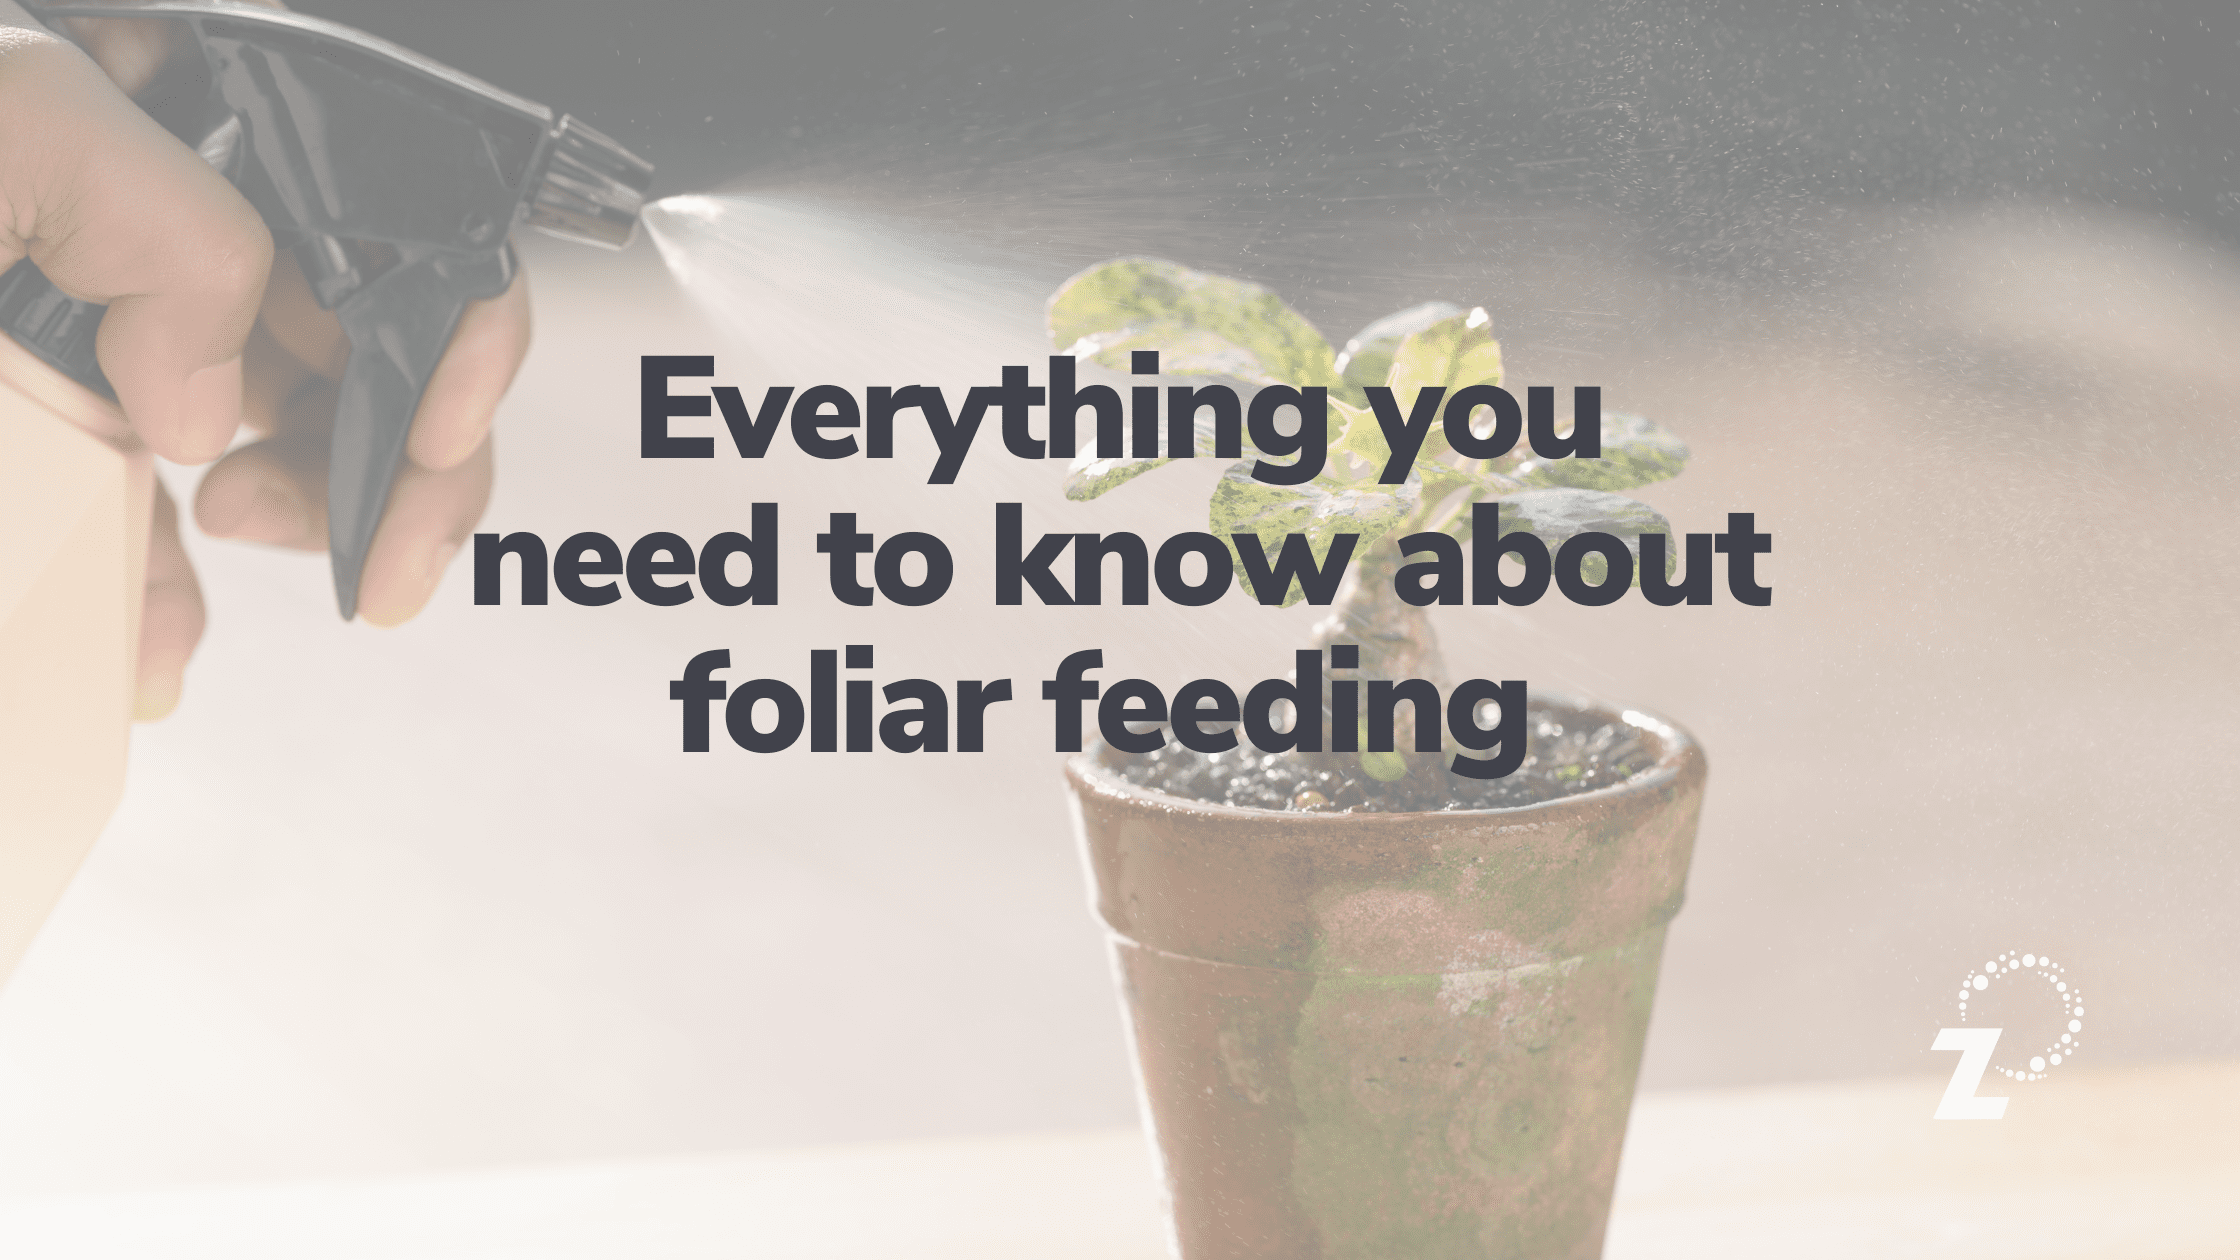 Featured image for “Everything you need to know about foliar feeding ”